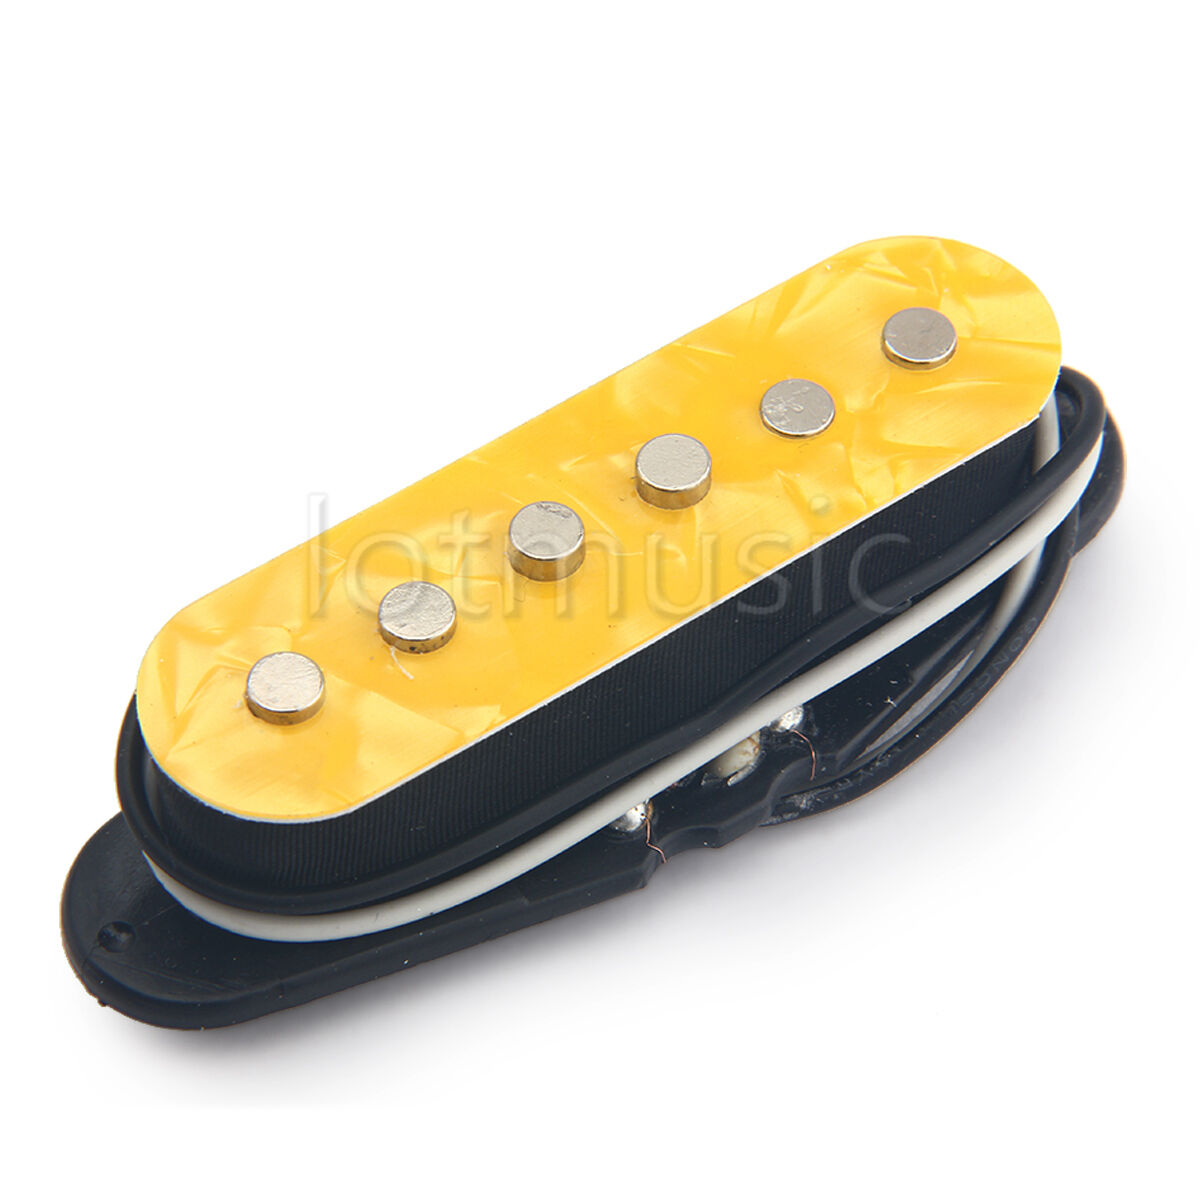 1 Pc Guitar Neck Pickup Single Coil For Electric Parts Yellow Pearlolid